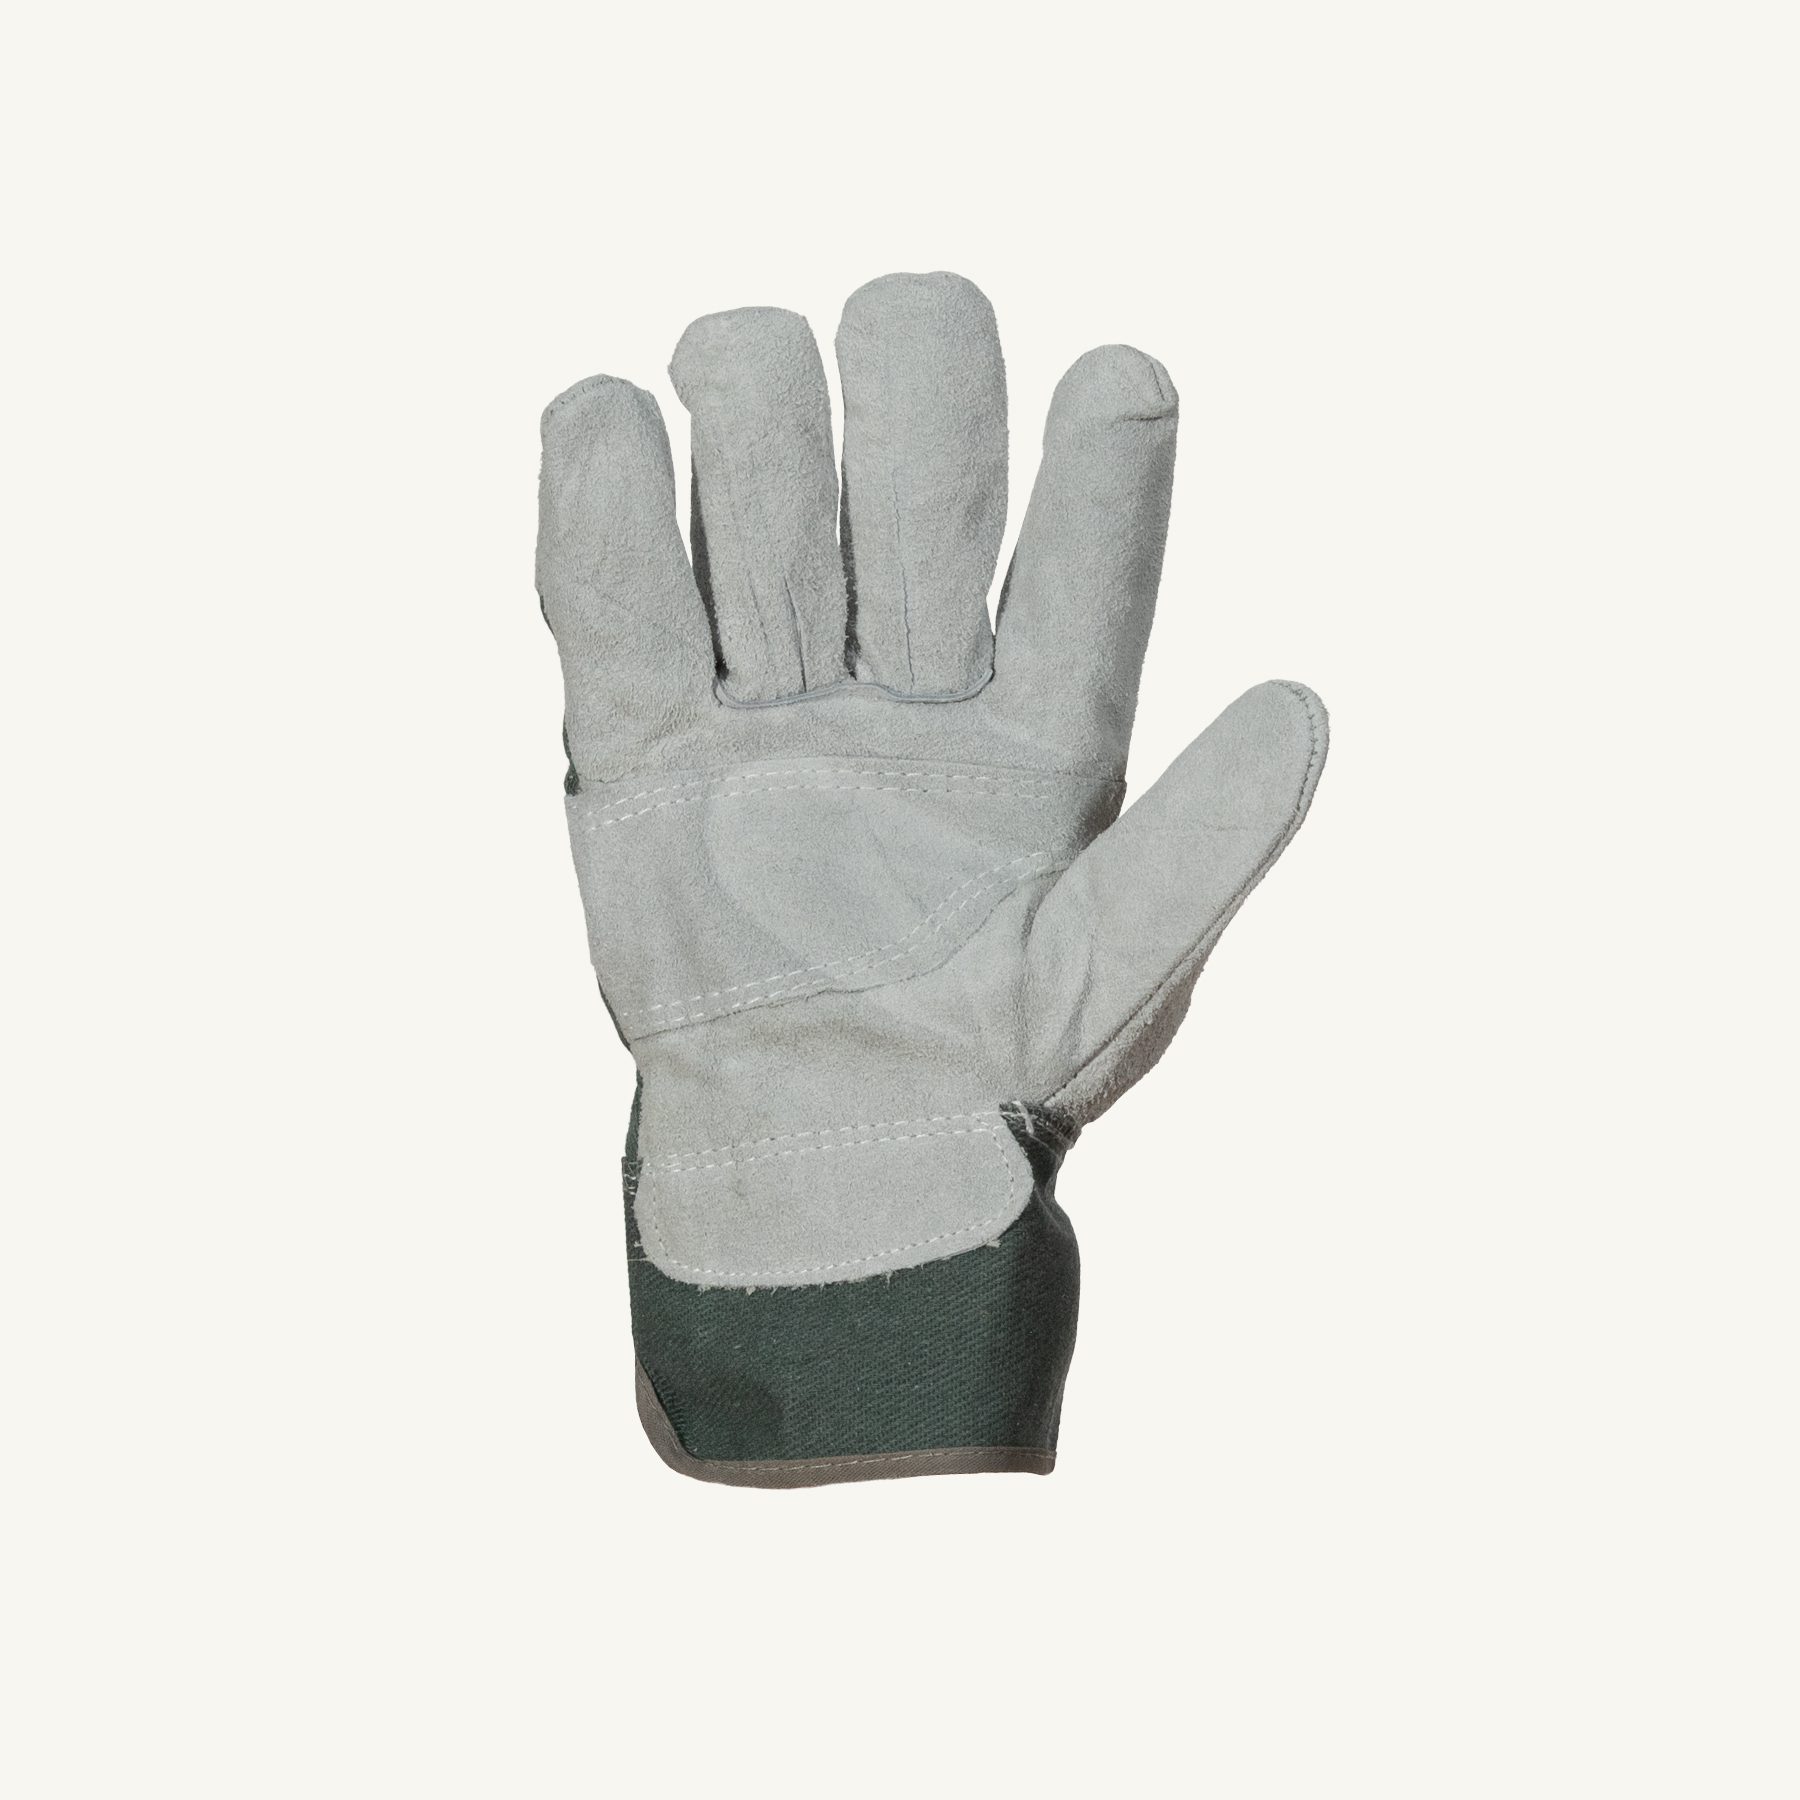 Chamois Leather Velcro Work Gloves Drivers,Mechanic,Sports FROM ONLY £2.39 